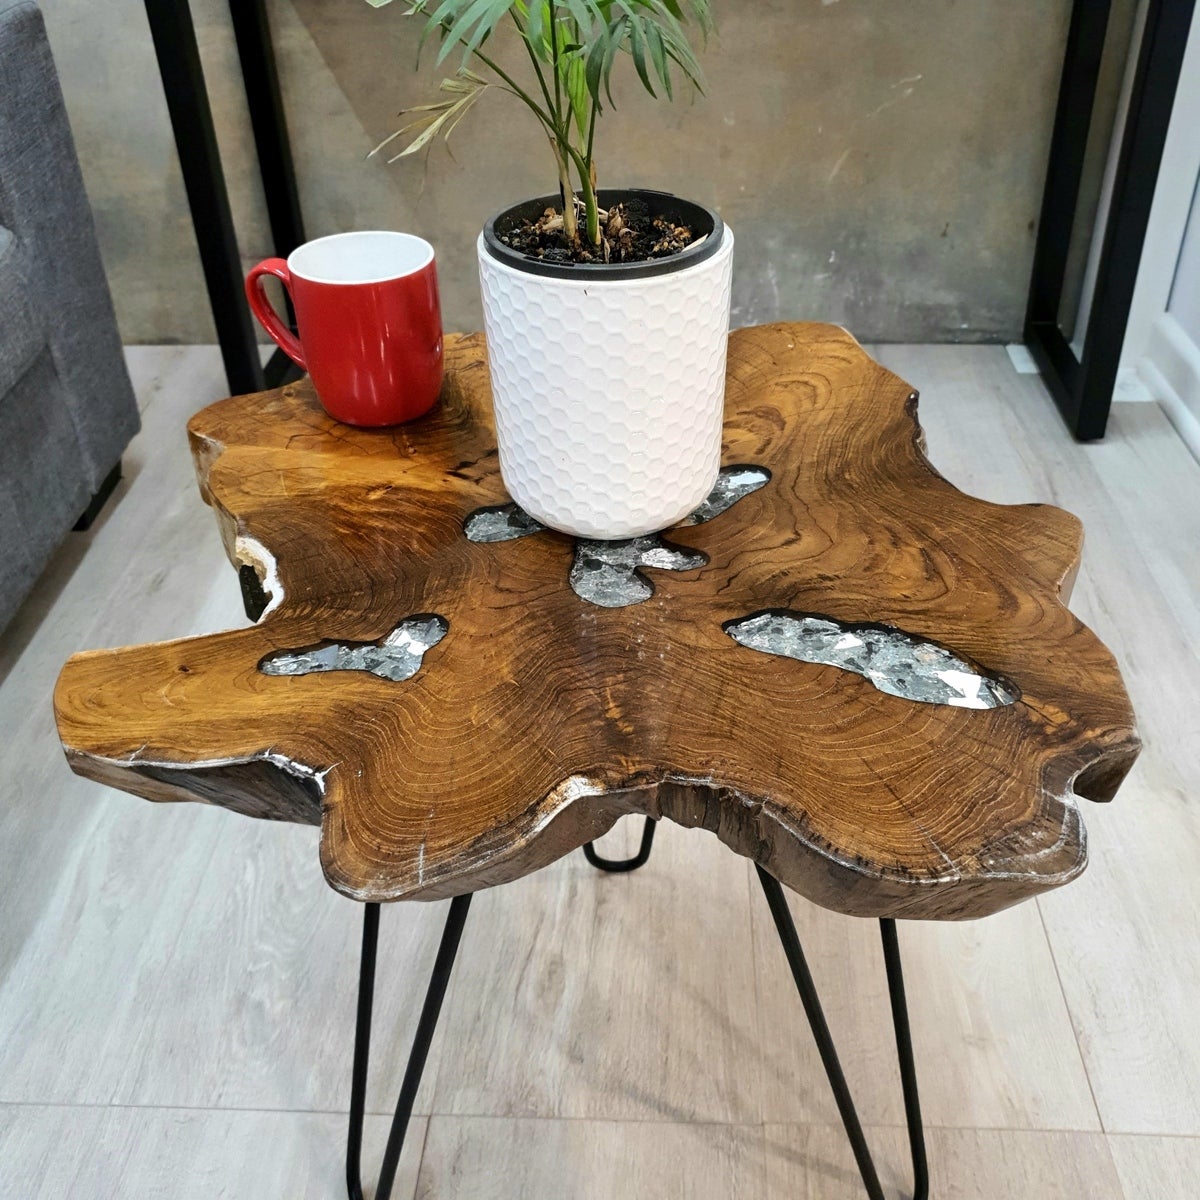 MANGO TREES Cropley Side Table/Coffee Table/Plant Stand Teak Wood Resin Finish